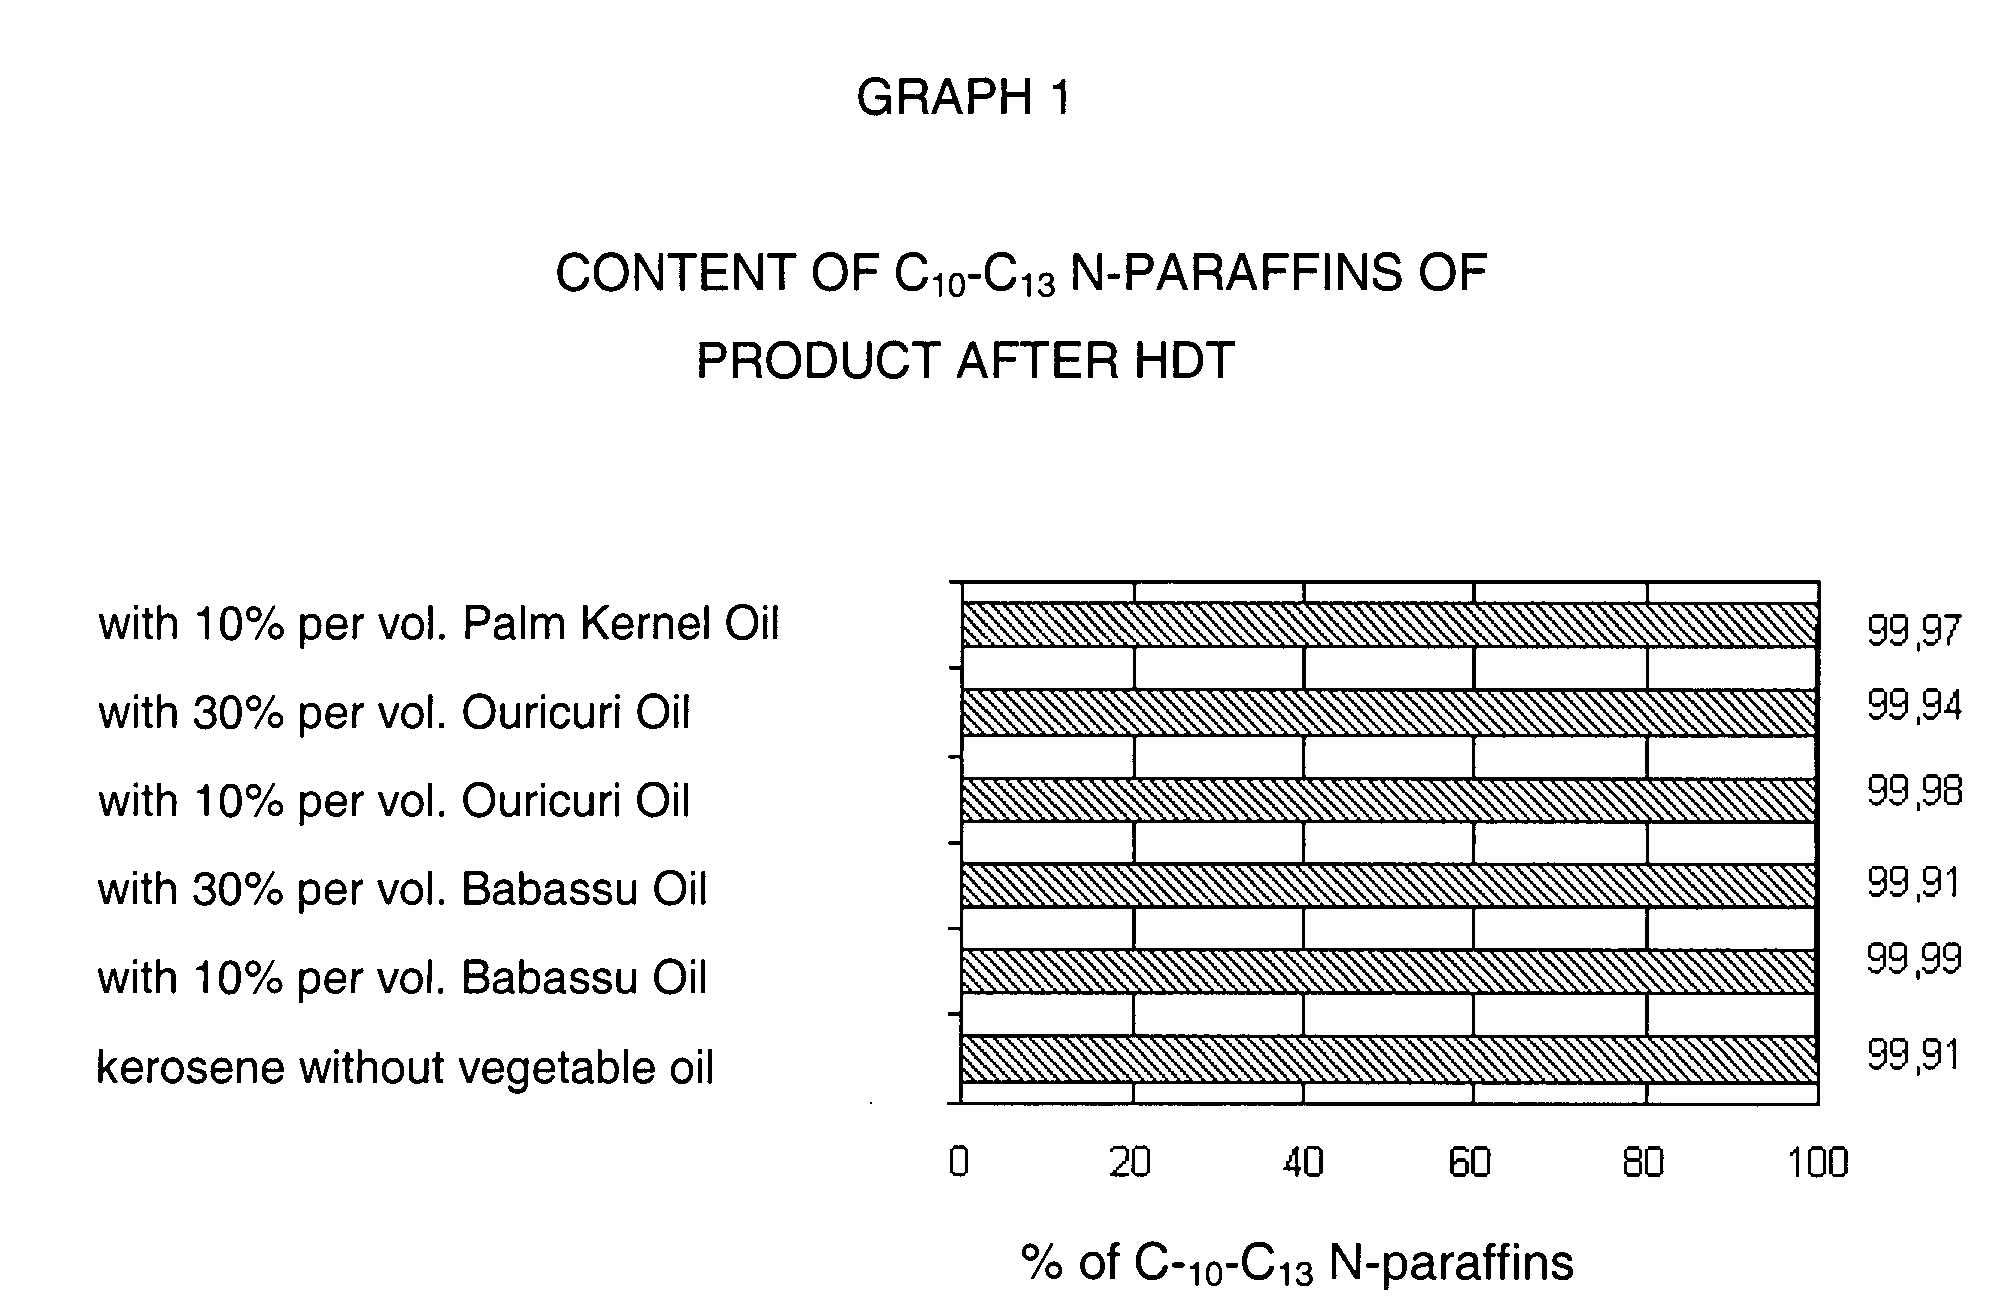 Process to obtain N-paraffins from vegetable oil